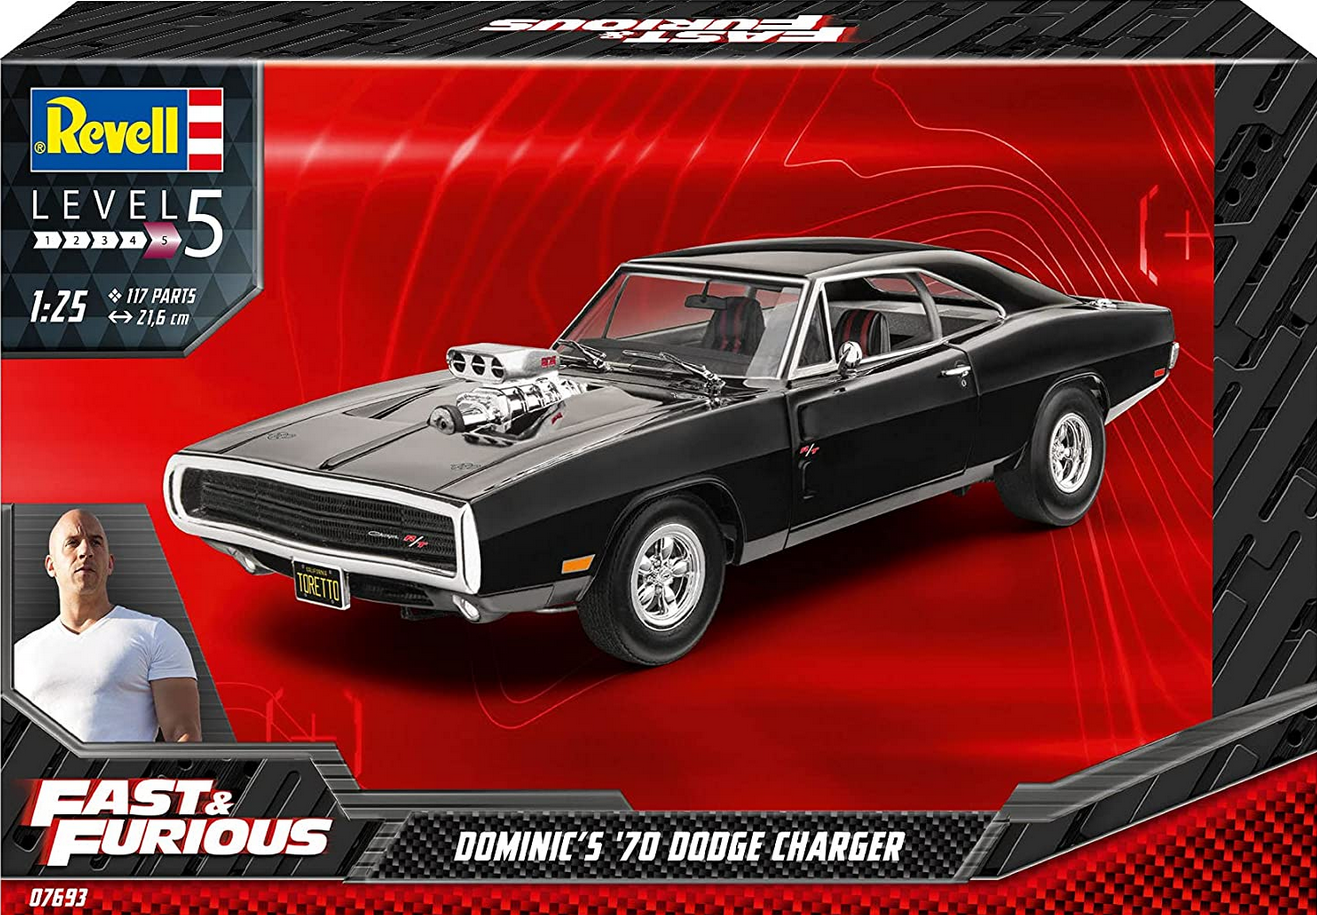 Dominic's 1970 Dodge Charger - Fast & Furious - REVELL 1/25